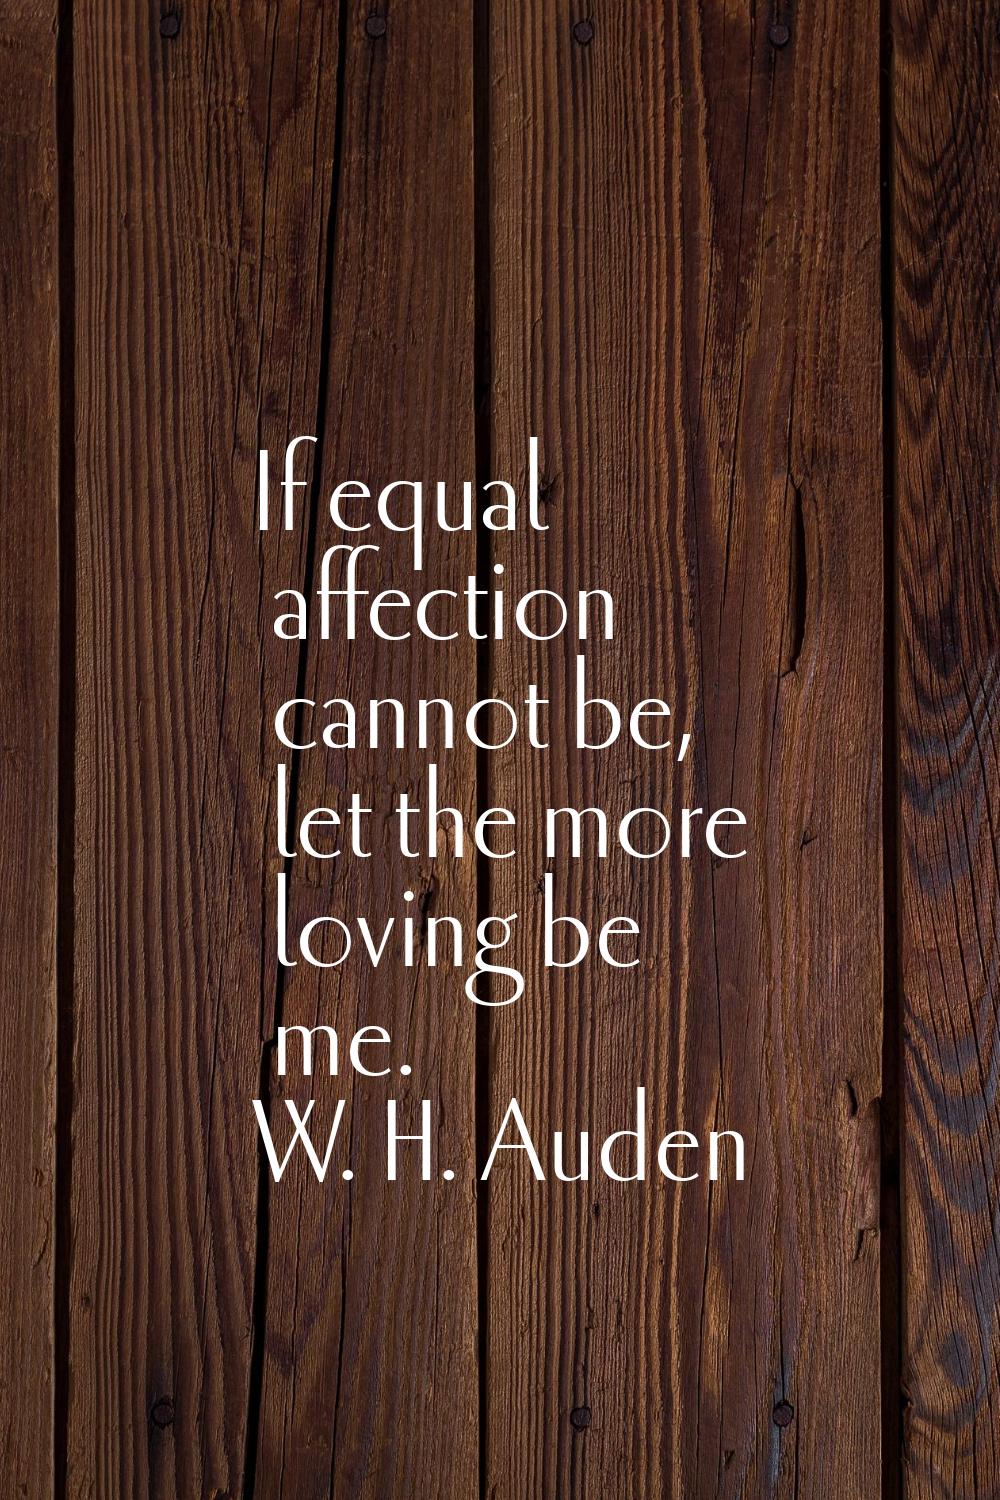 If equal affection cannot be, let the more loving be me.